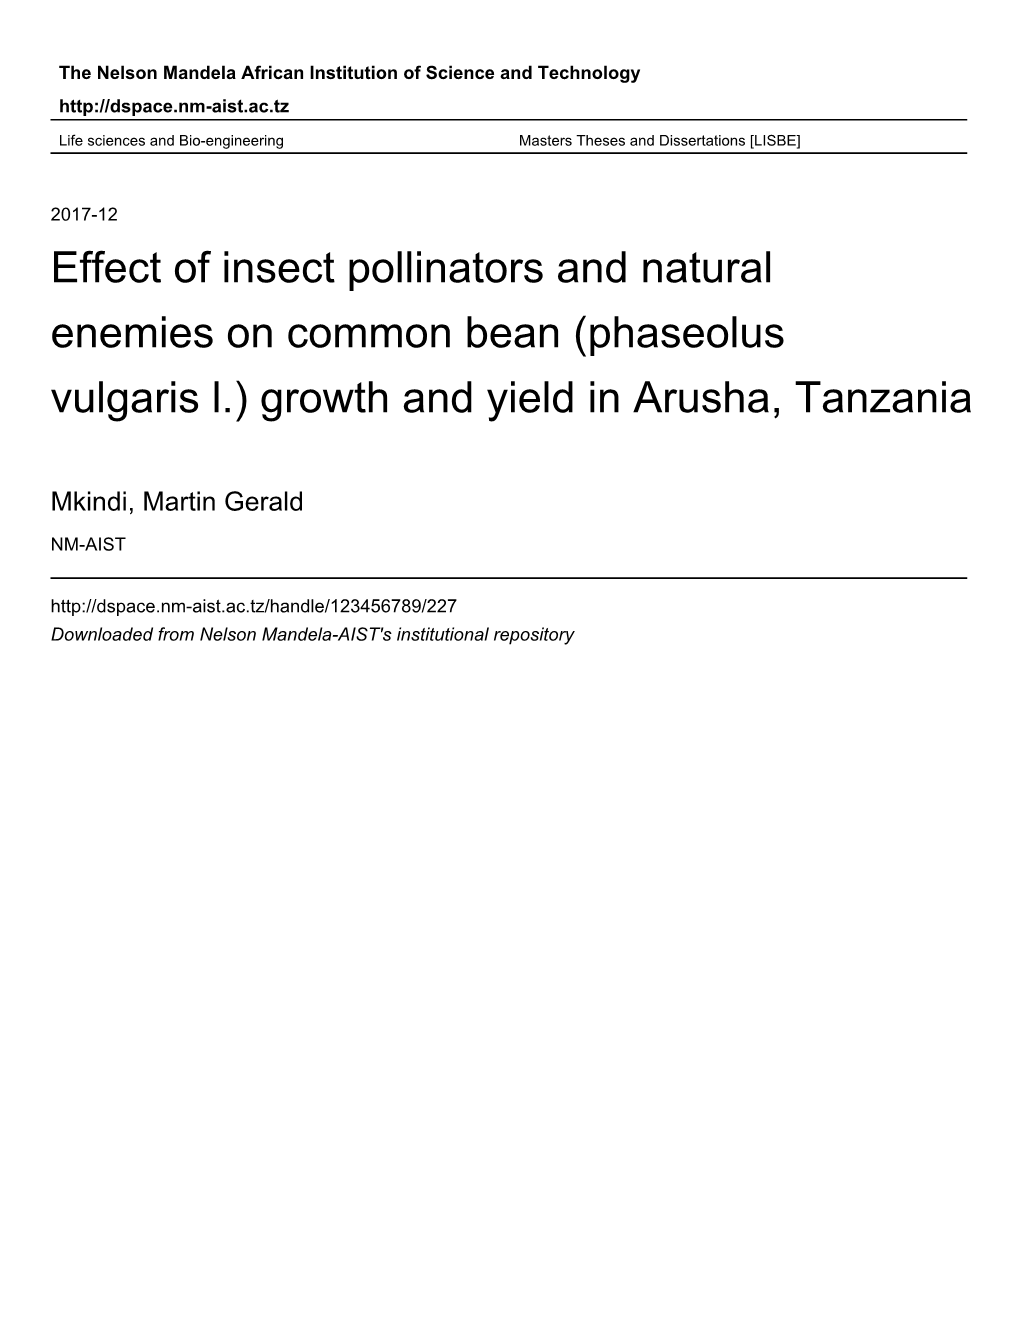 Effect of Insect Pollinators and Natural Enemies on Common Bean (Phaseolus Vulgaris L.) Growth and Yield in Arusha, Tanzania